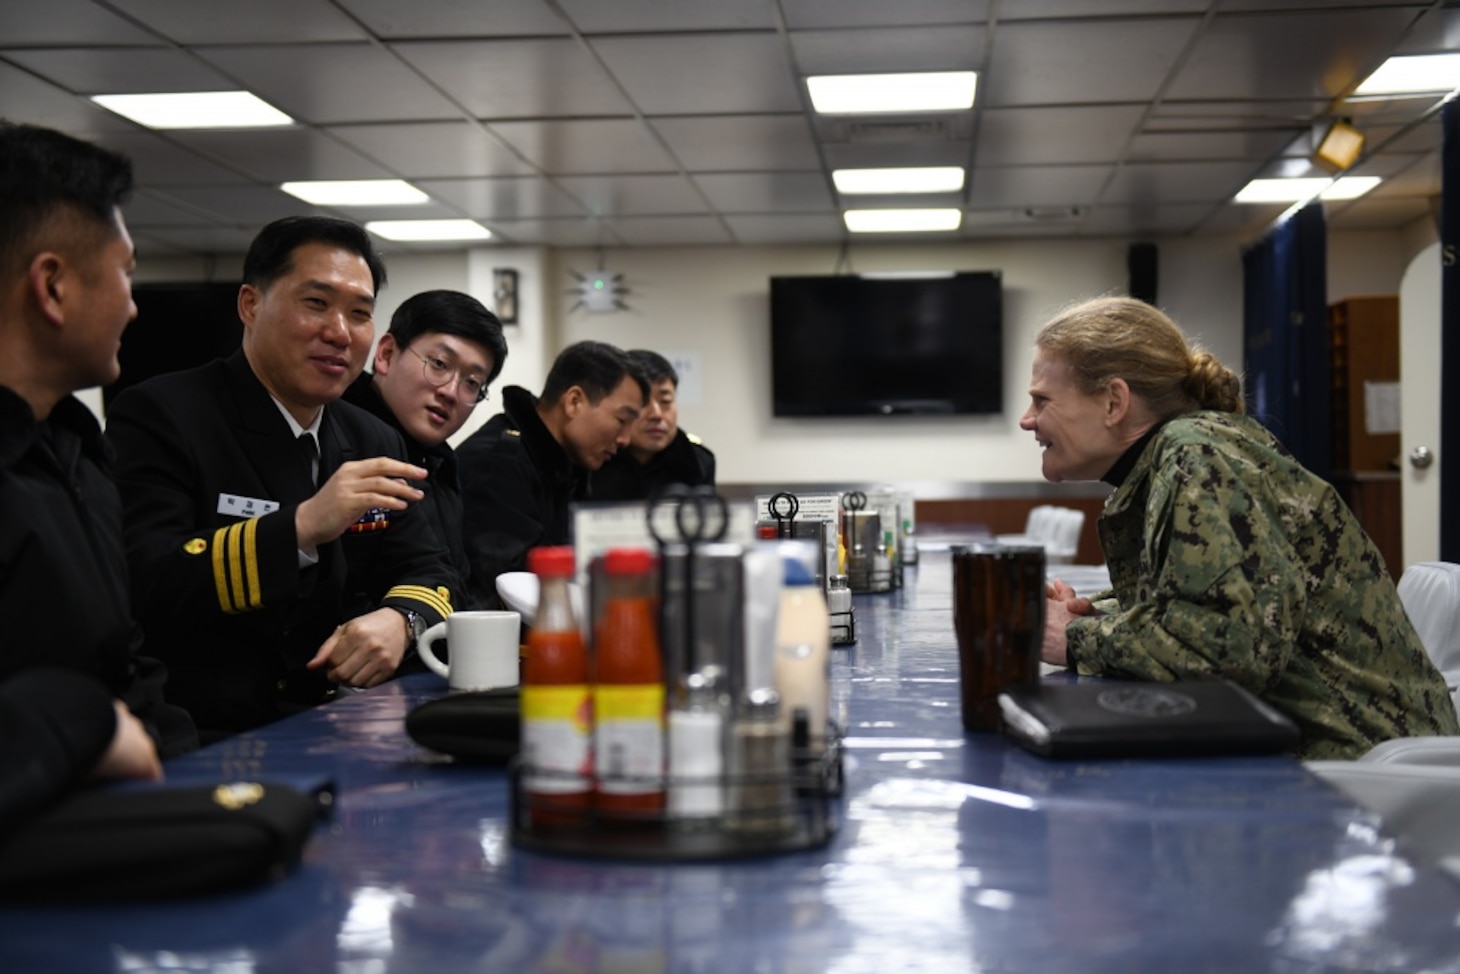 U.S. 7th Fleet Surgeon, Capt. Christine L. G. Sears, from Norfolk, Virginia, speaks with Republic of Korea Navy Fleet Surgeon, Cmdr. Jae-hyon Park prior to a medical demonstration held aboard U.S. 7th Fleet flagship, USS Blue Ridge. Blue Ridge with embarked U.S. 7th Fleet Sailors arrived in Busan, Republic of Korea (ROK) for a regularly scheduled port visit Feb. 5. During their visit they will engage in local culture, host military-to-military engagements and build relationships through music and public service activities.